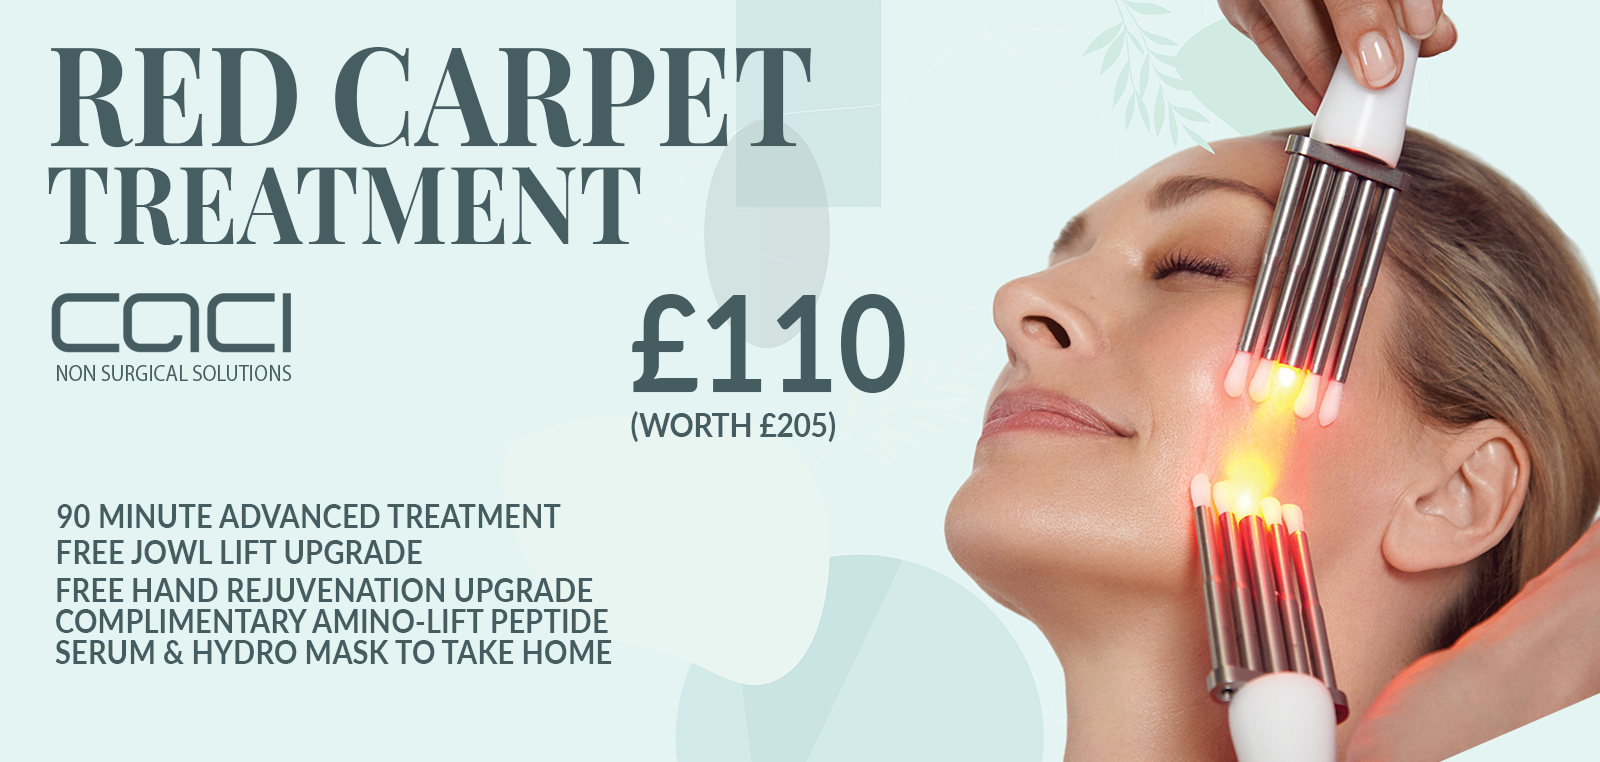 Caci Red Carpet treatment banner